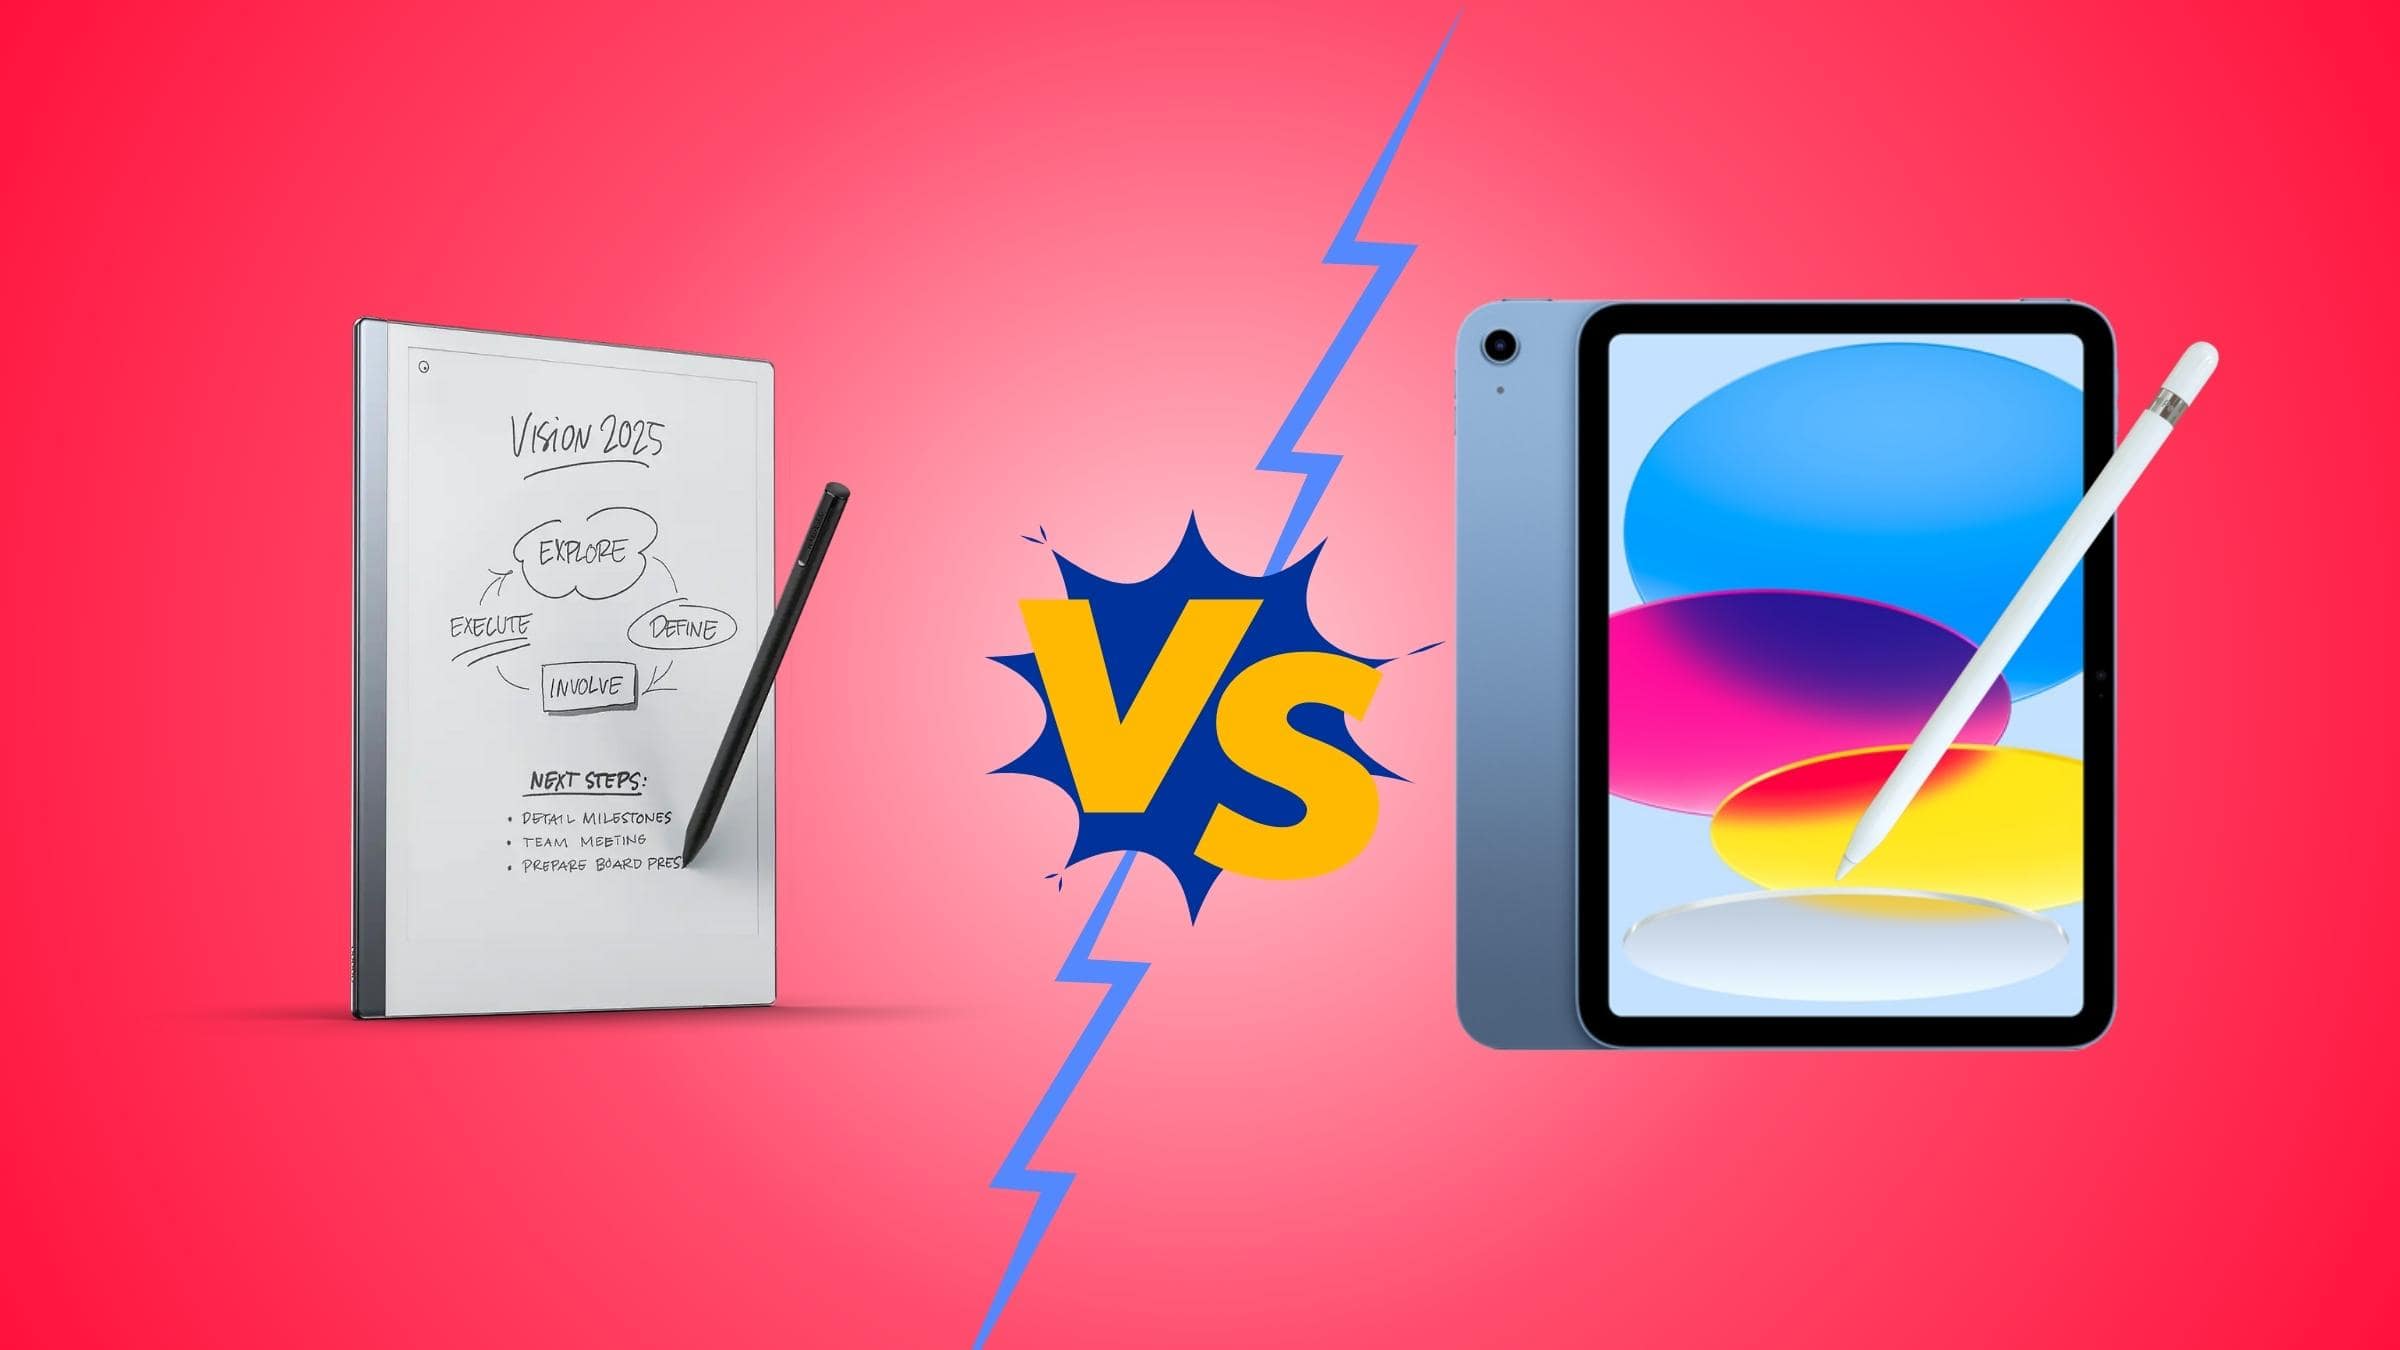 which is better for note taking remarkable 2 or iPad? I choose iPad